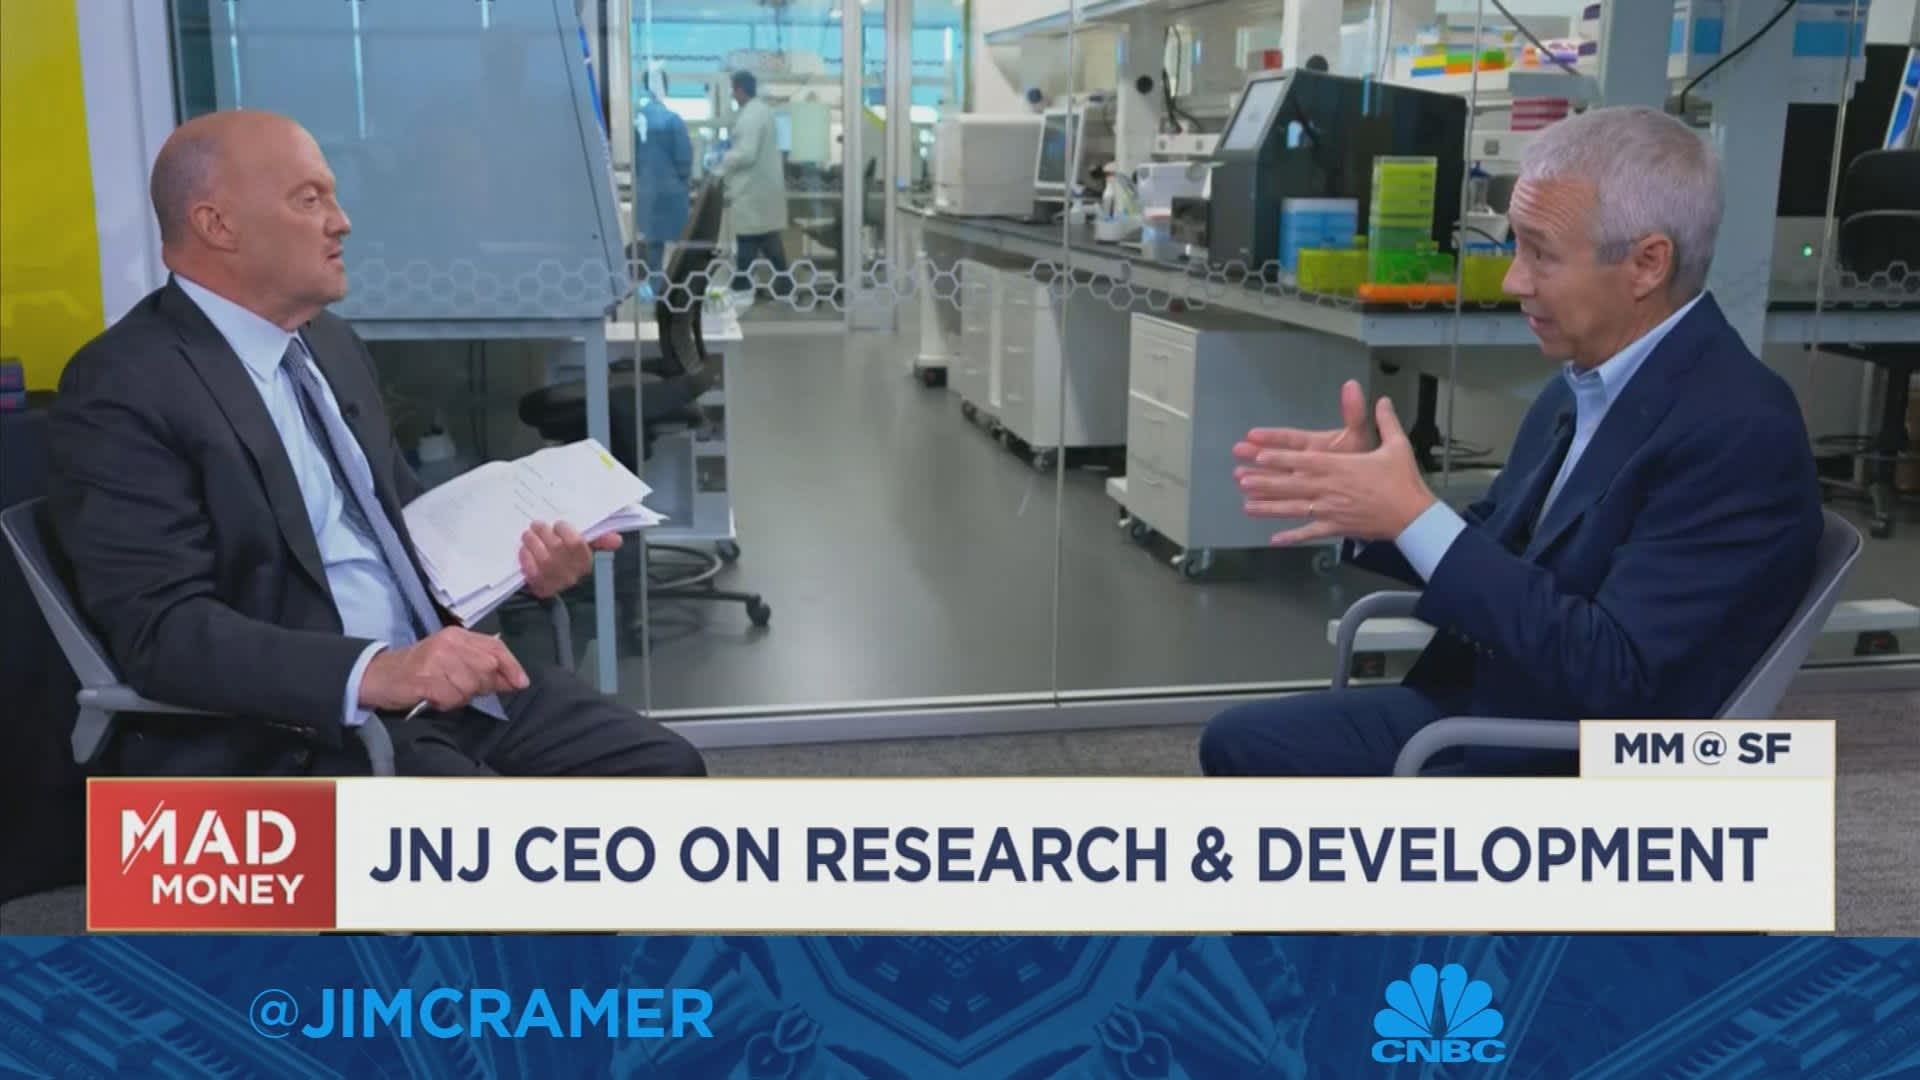 Johnson &amp; Johnson CEO touts 'smart' data approach to new medicines at new research center